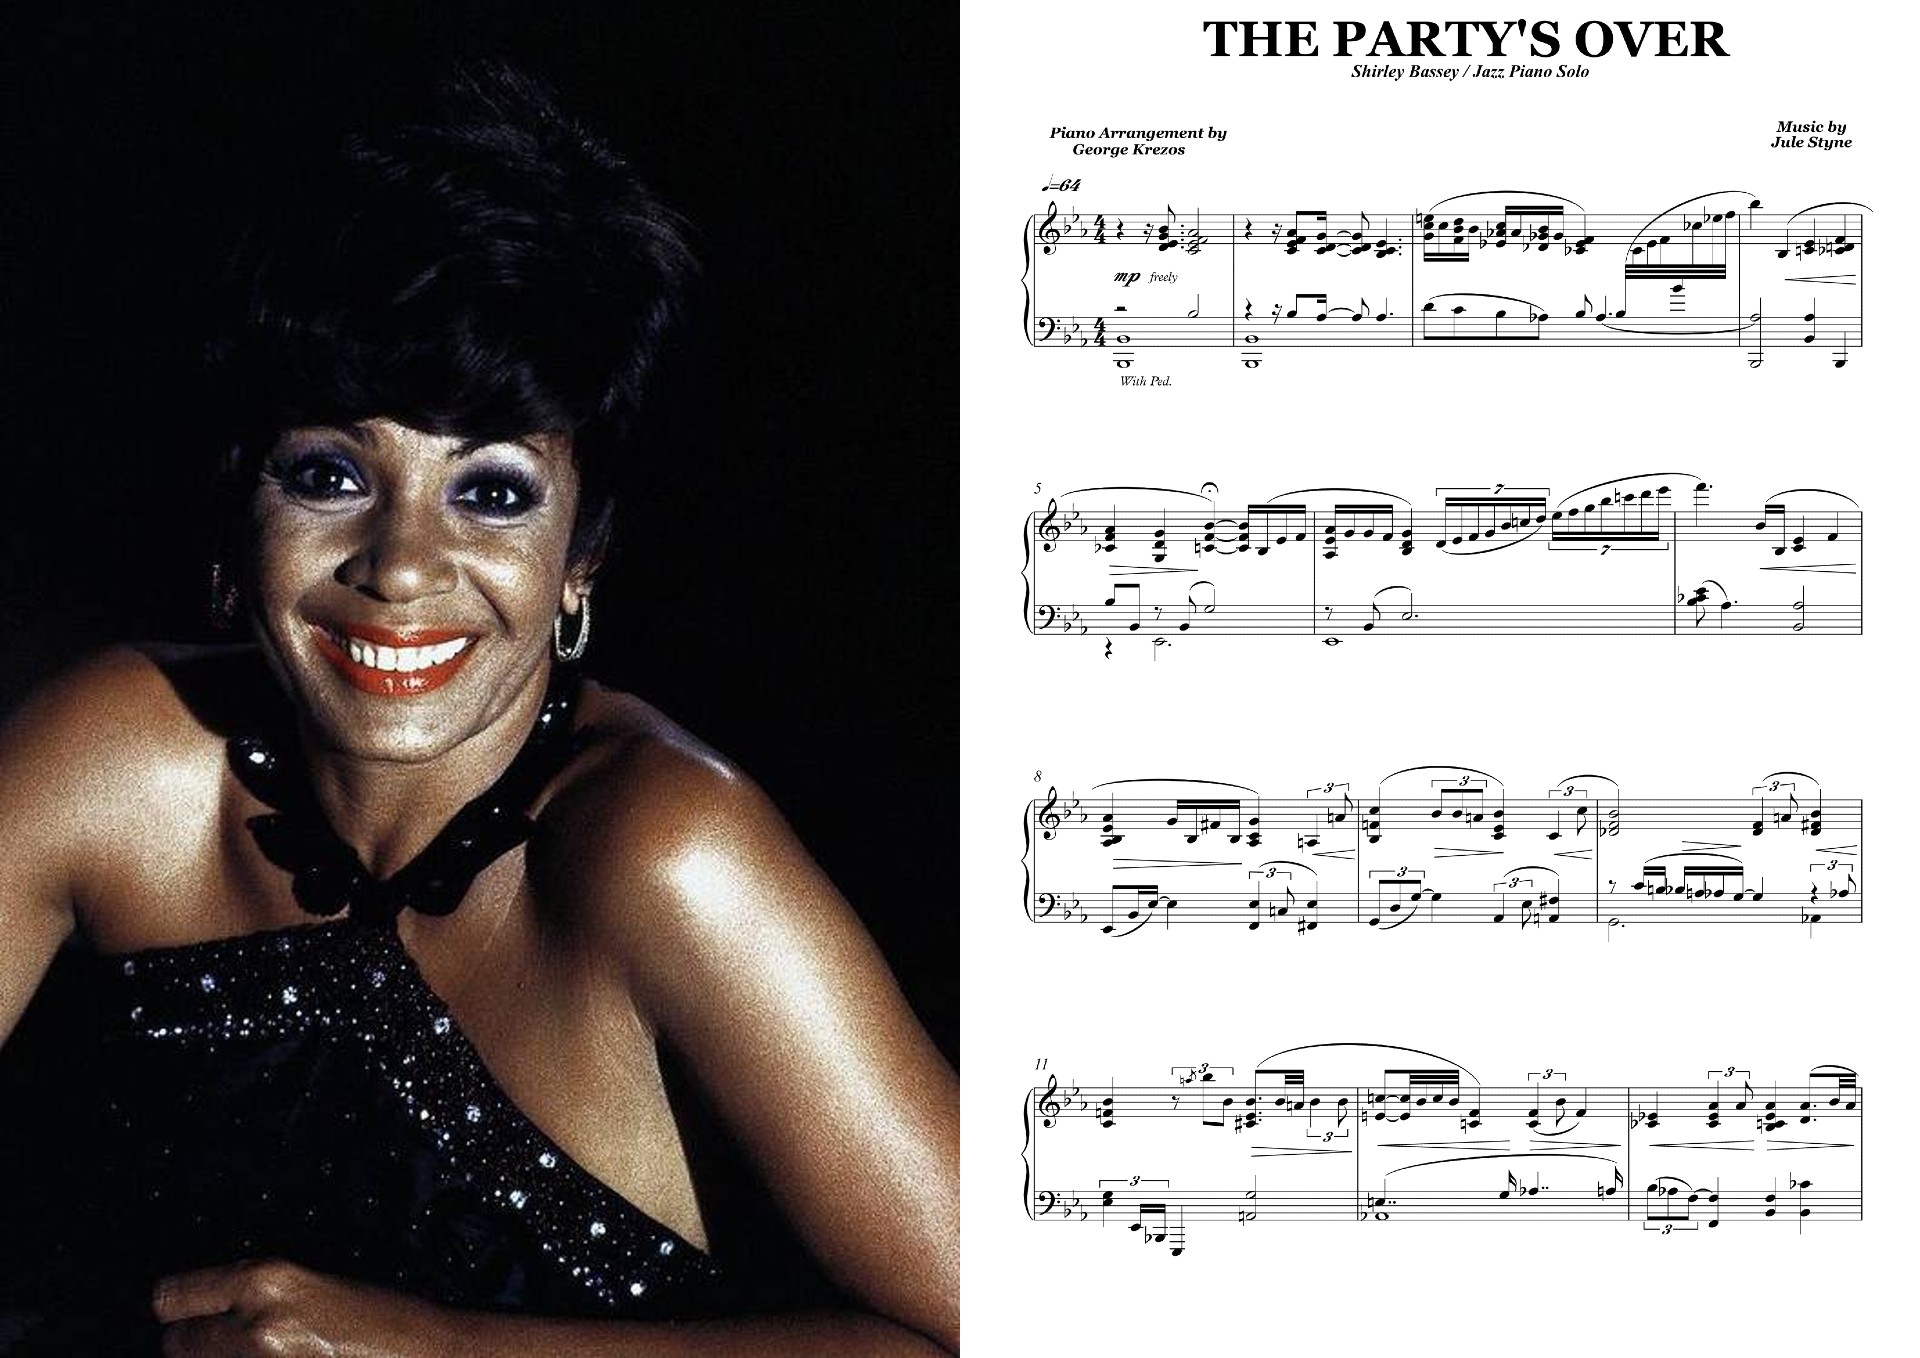 The Party's Over (Shirley Bassey).jpg